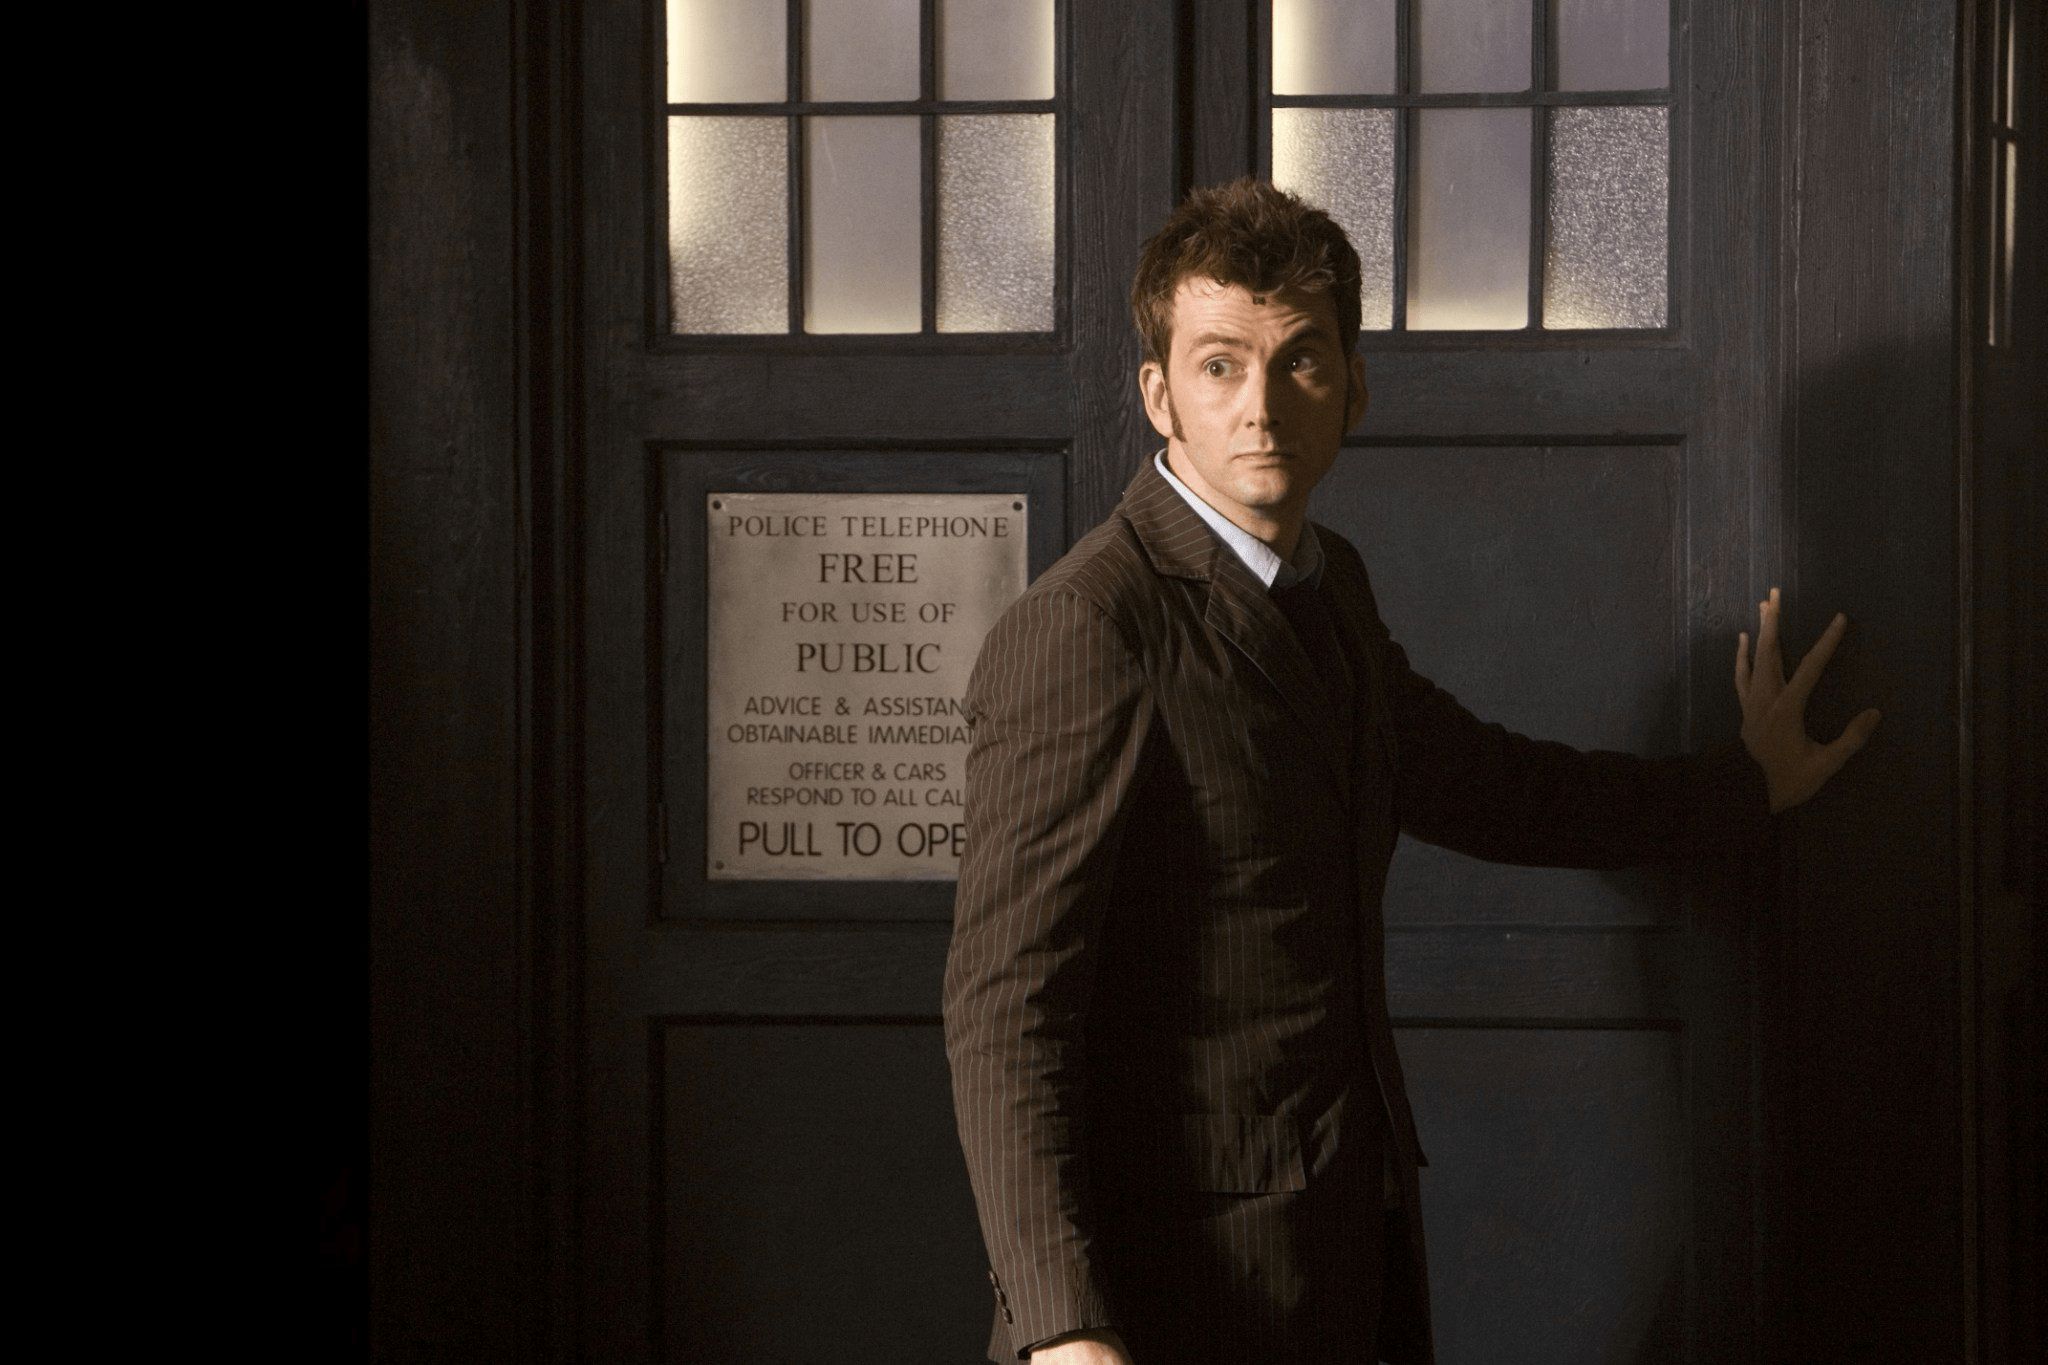 The Reasons Behind Each Doctor Who Departure